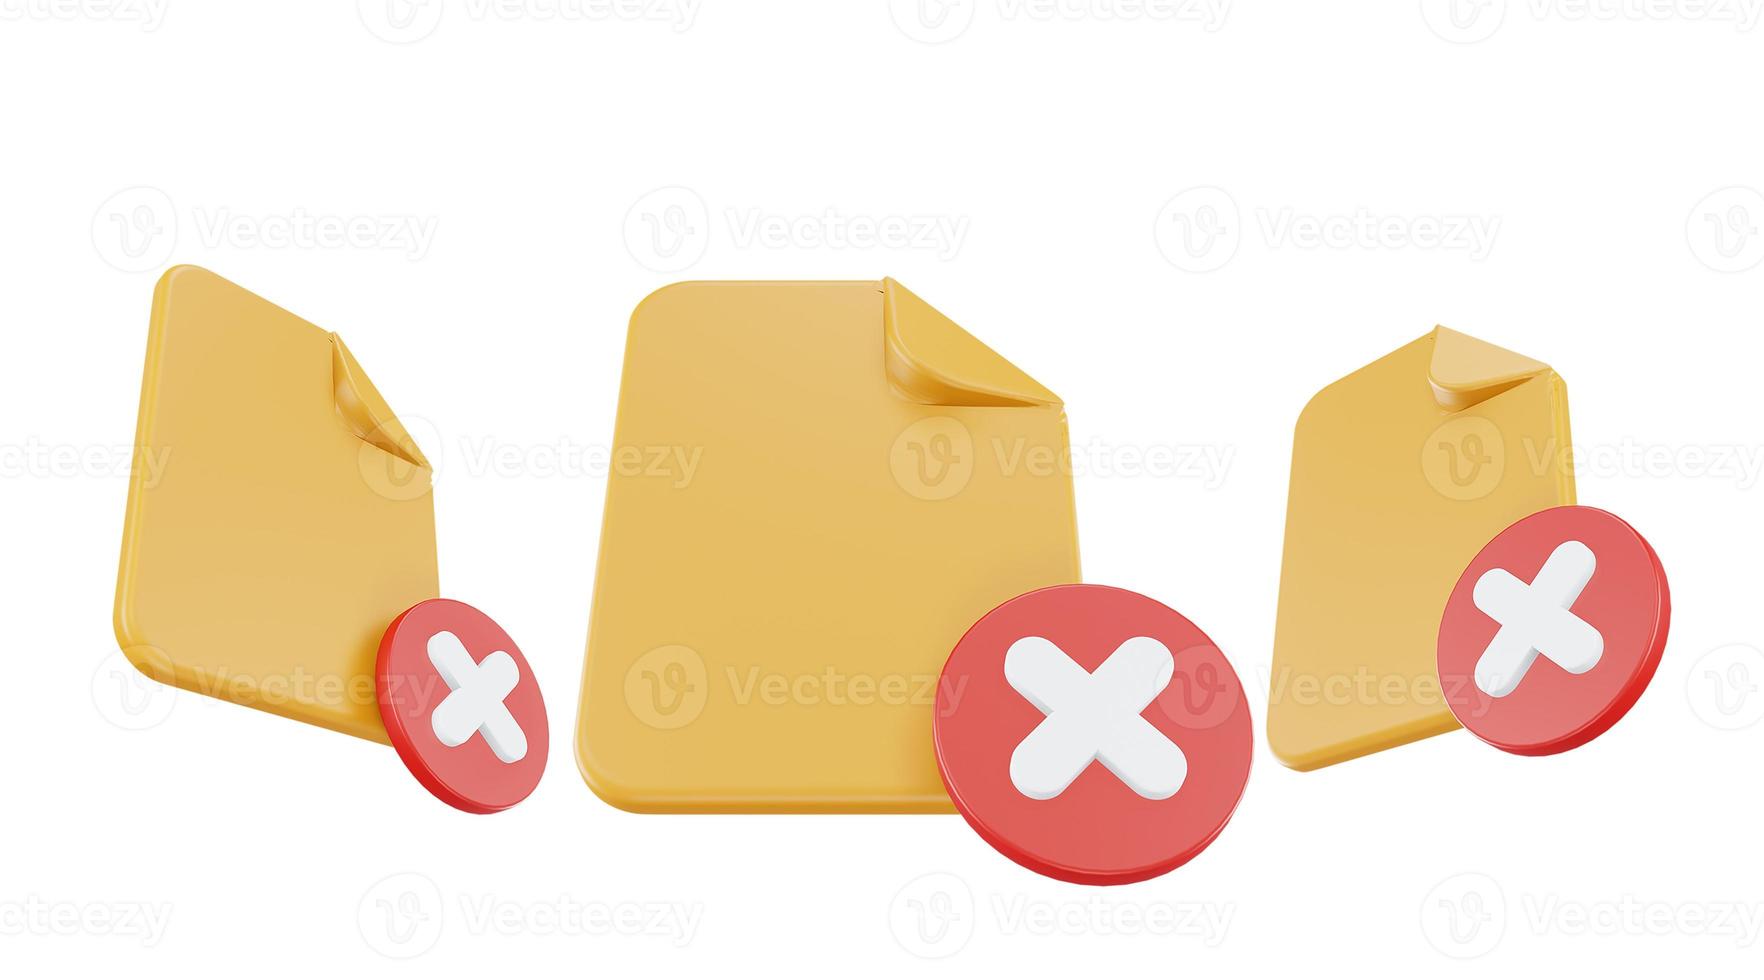 3d render file cross icon with orange file paper and red cross photo